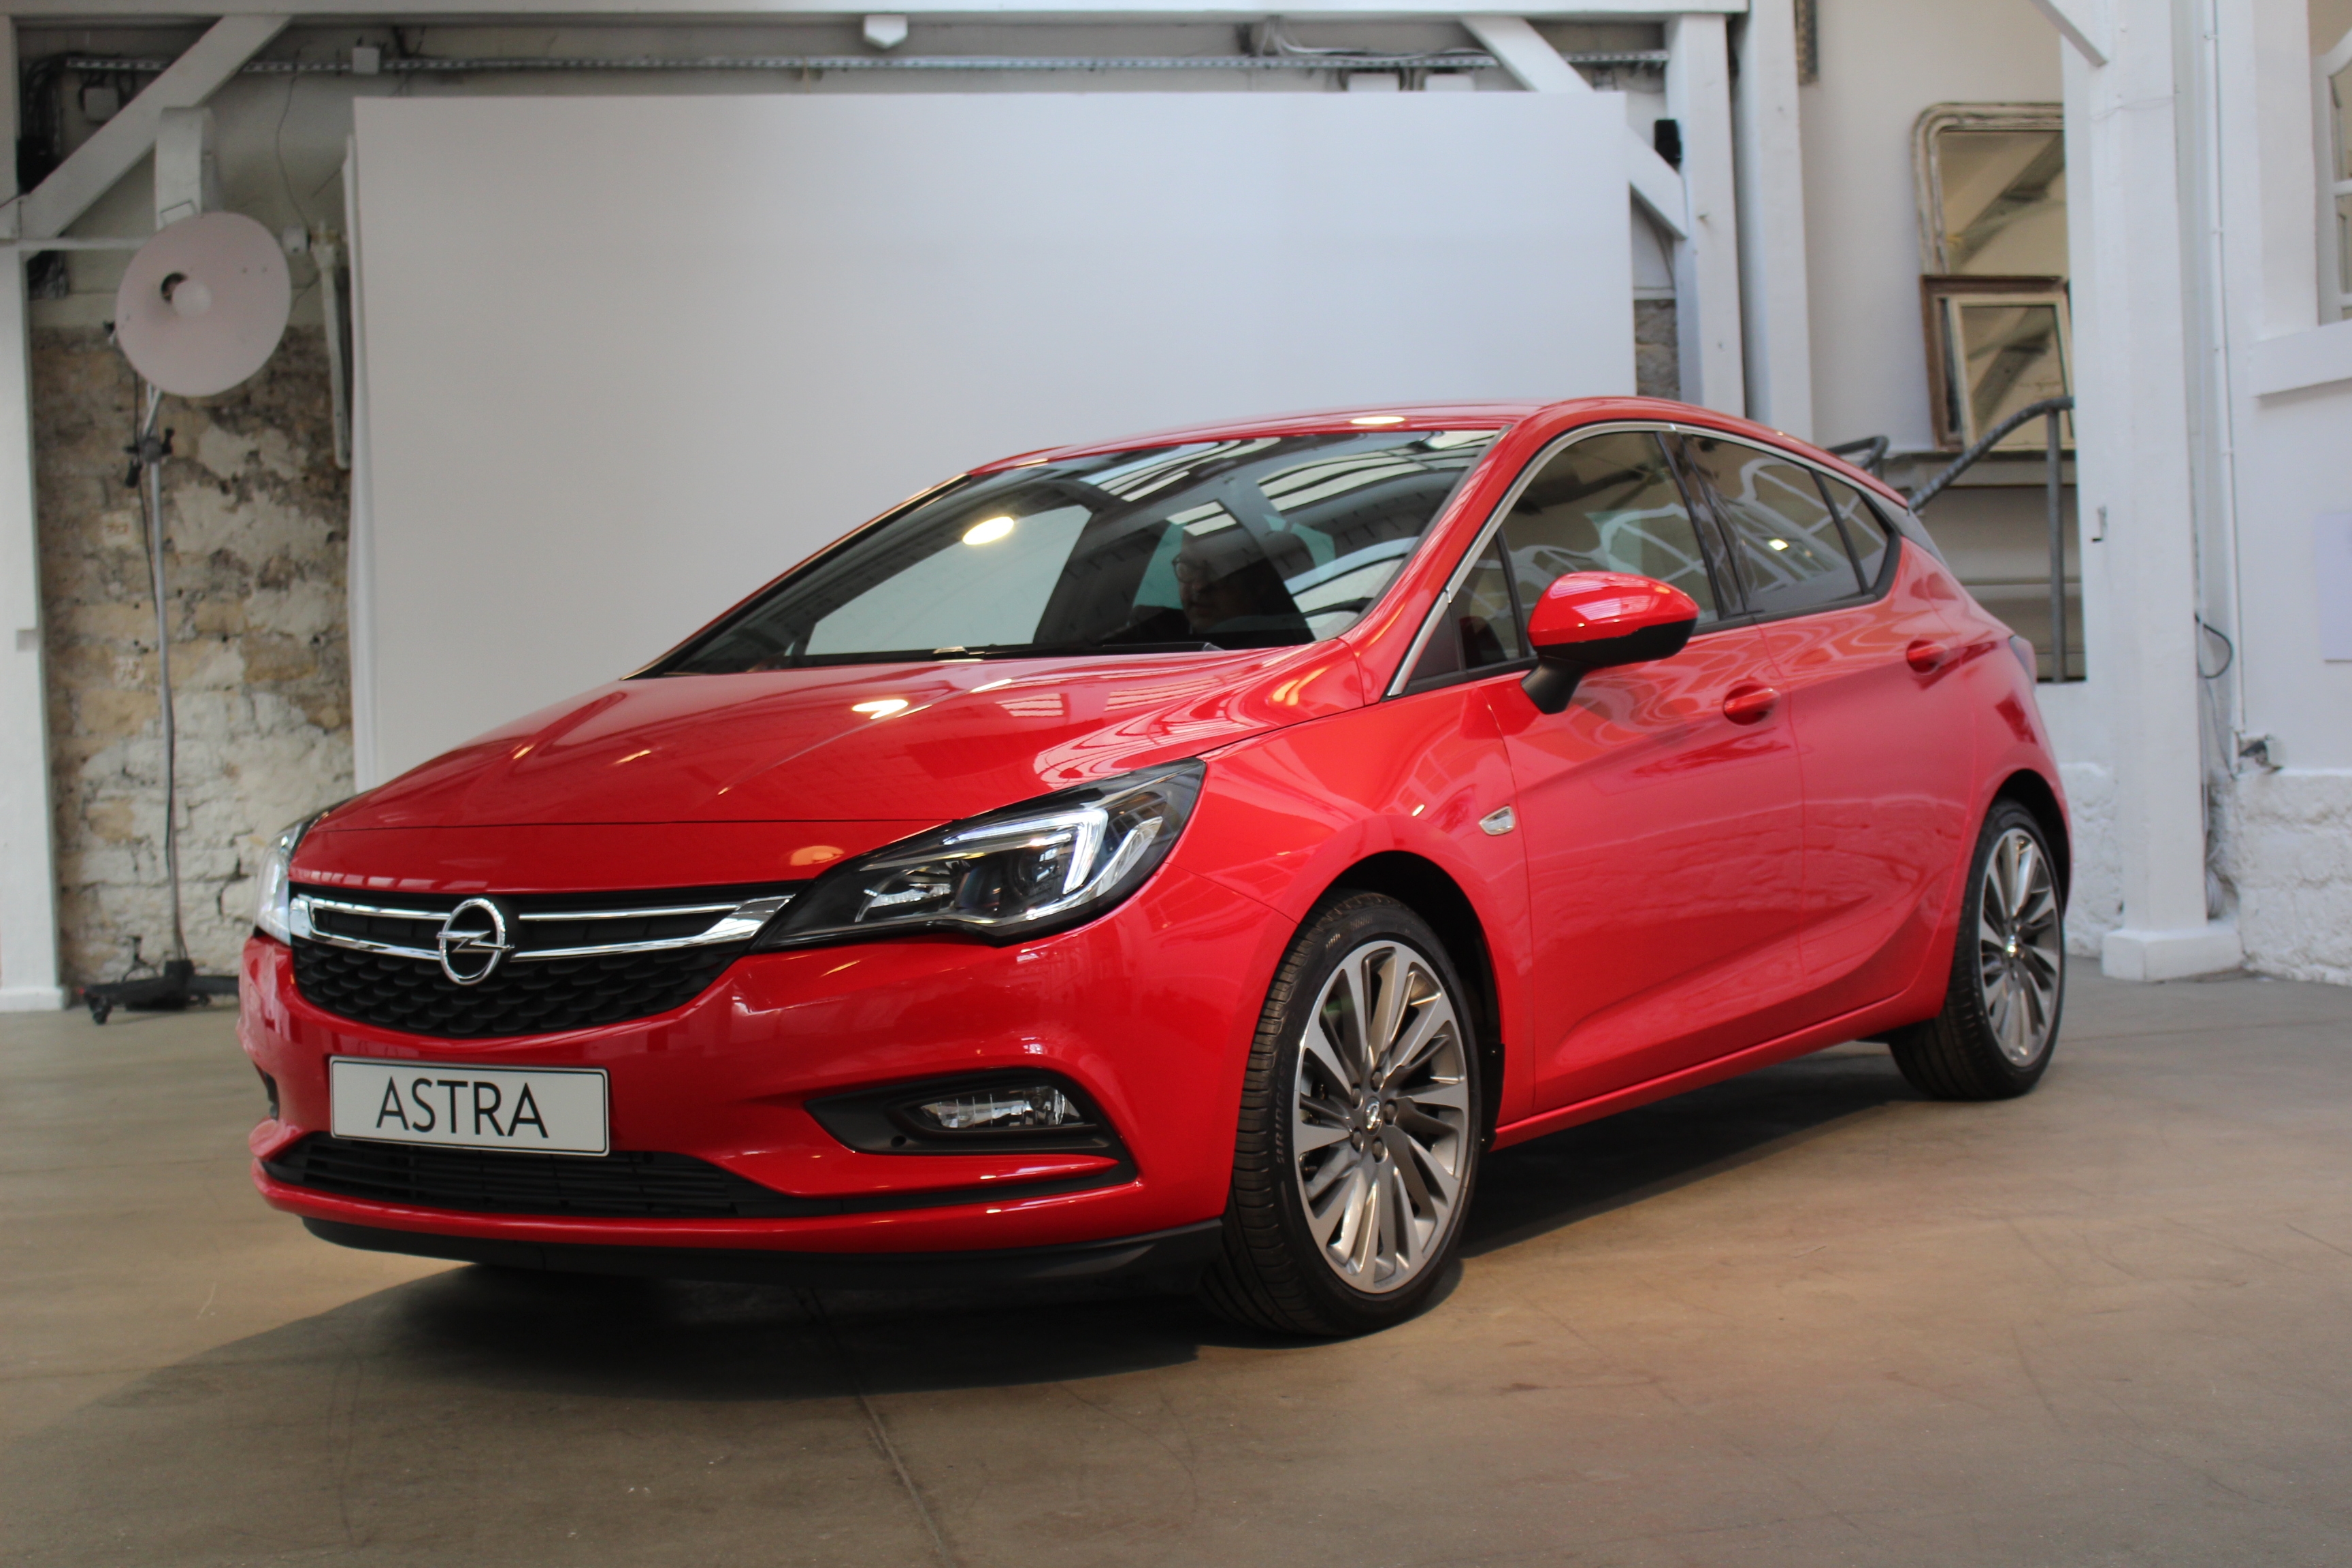 Opel Astra Hatchback interior specifications